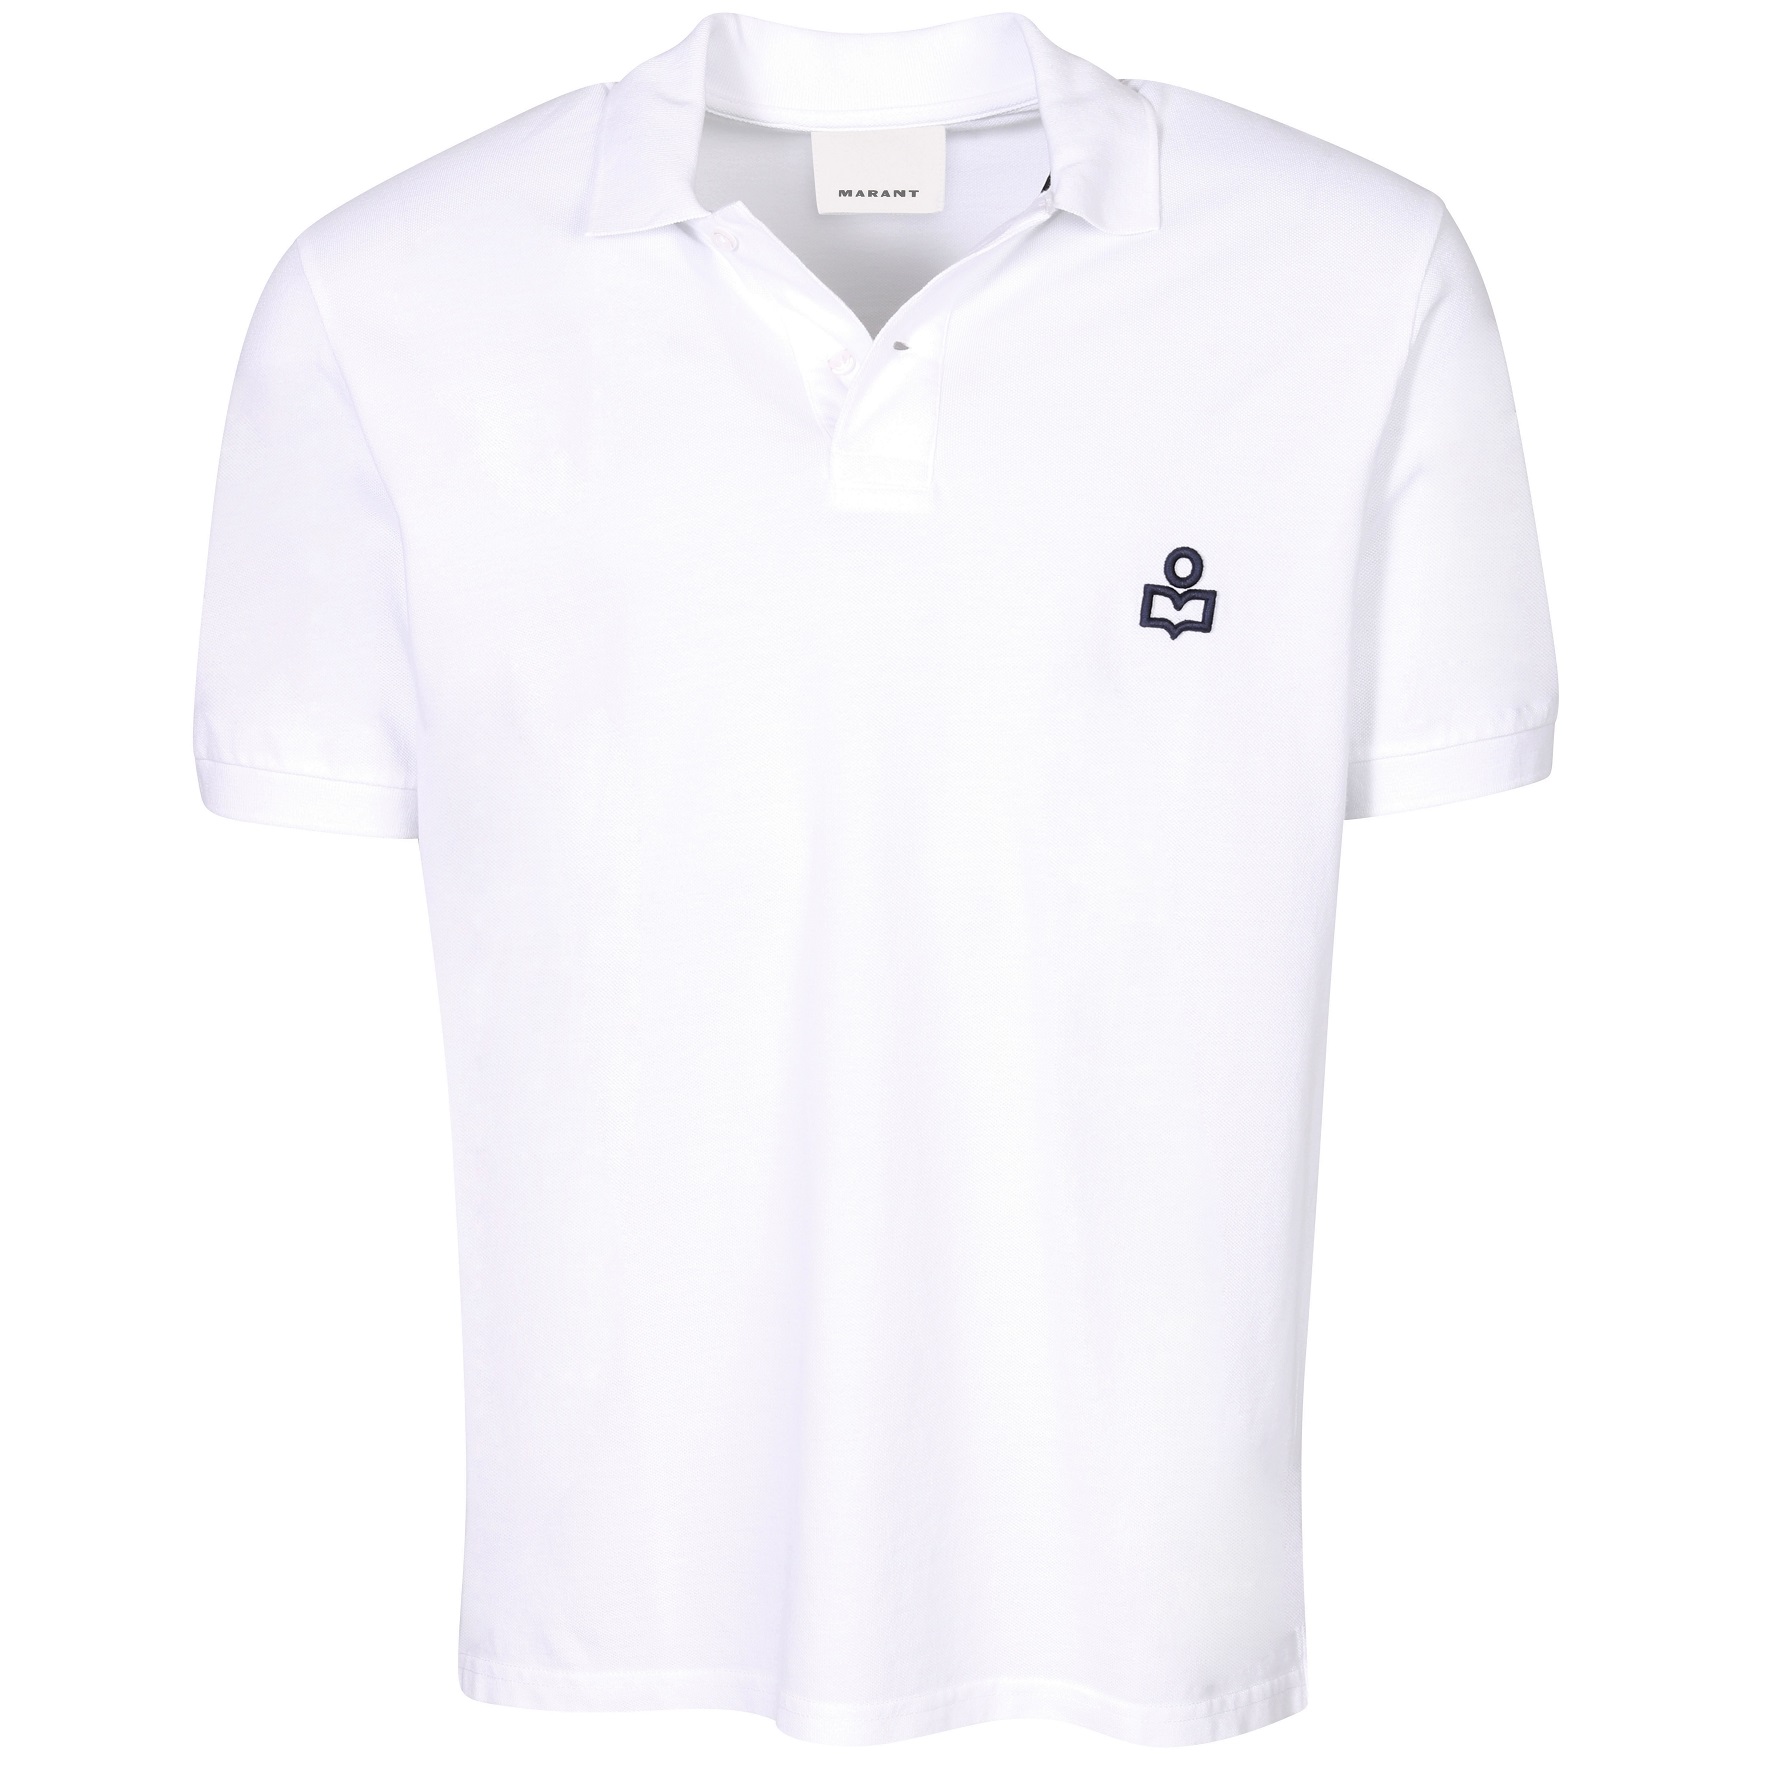 ISABEL MARANT Afko Polo Shirt in White/Navy